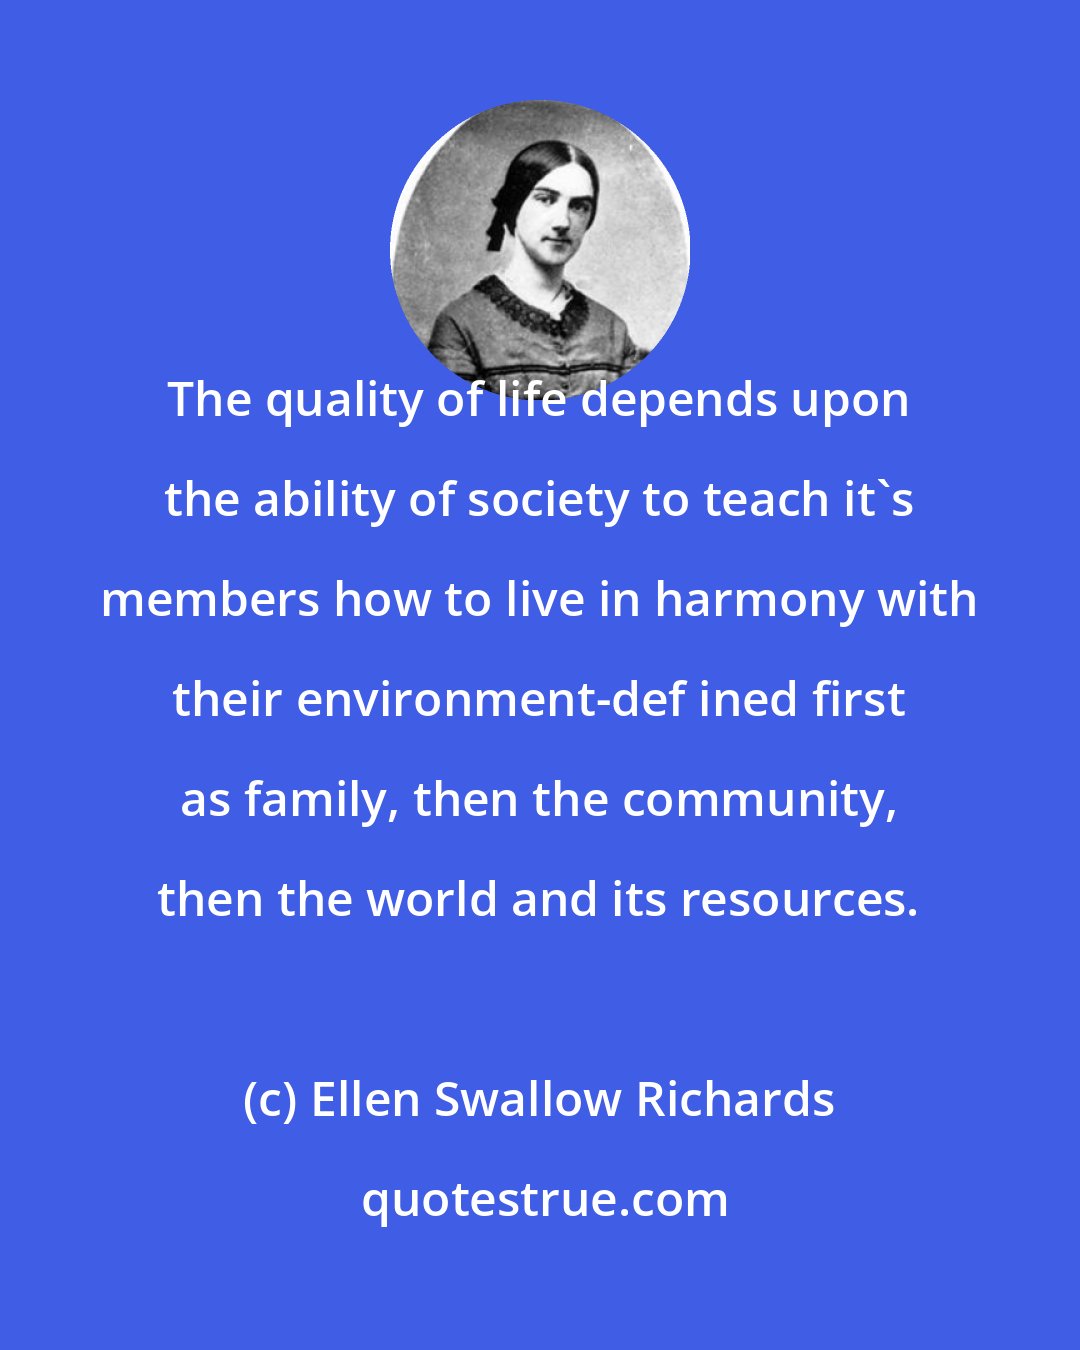 Ellen Swallow Richards: The quality of life depends upon the ability of society to teach it's members how to live in harmony with their environment-def ined first as family, then the community, then the world and its resources.